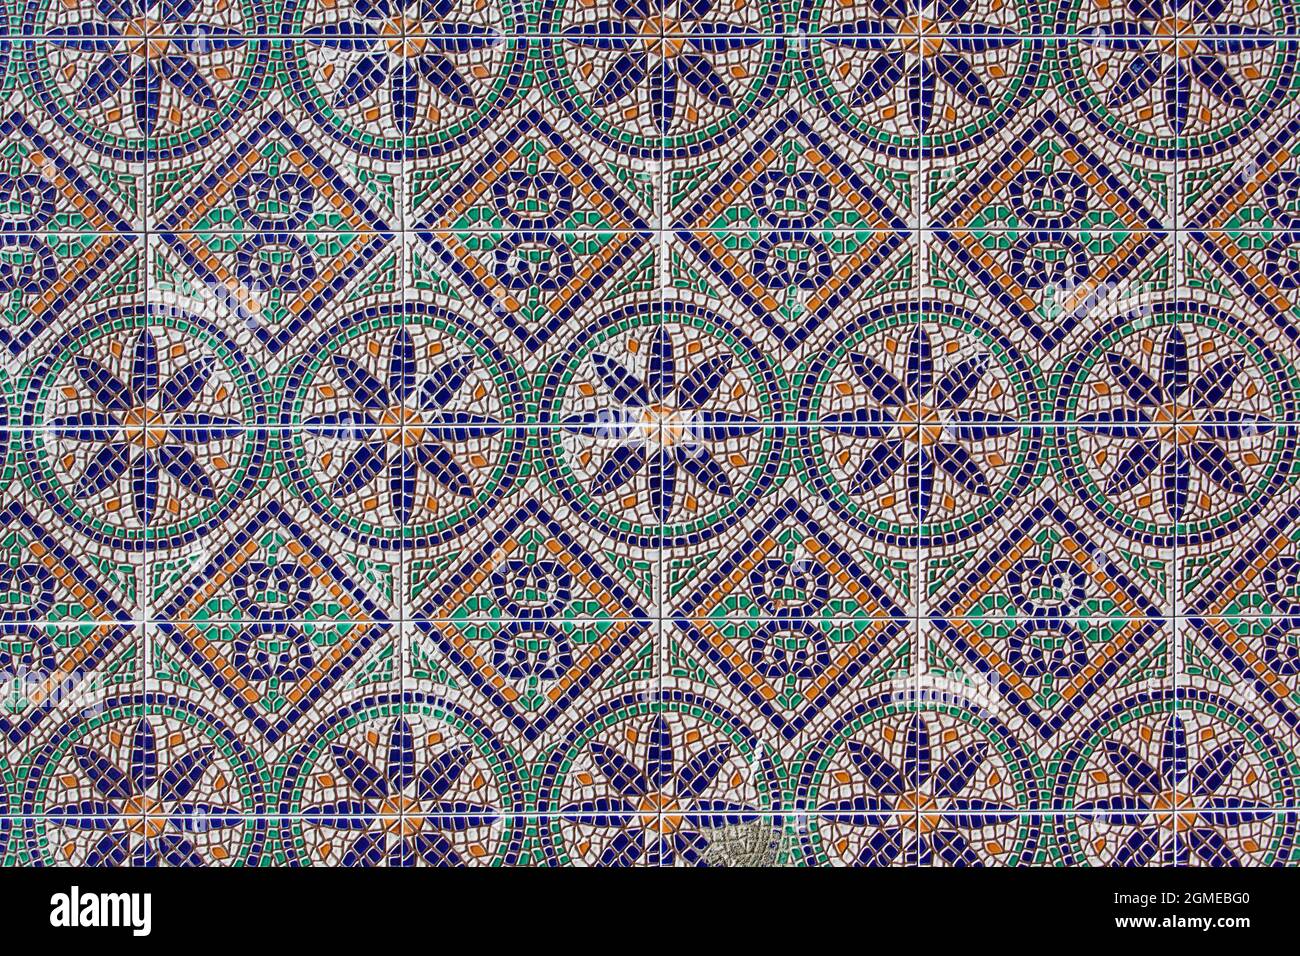 Ancient mosaic with colorful geometric and floral patterns Stock Photo